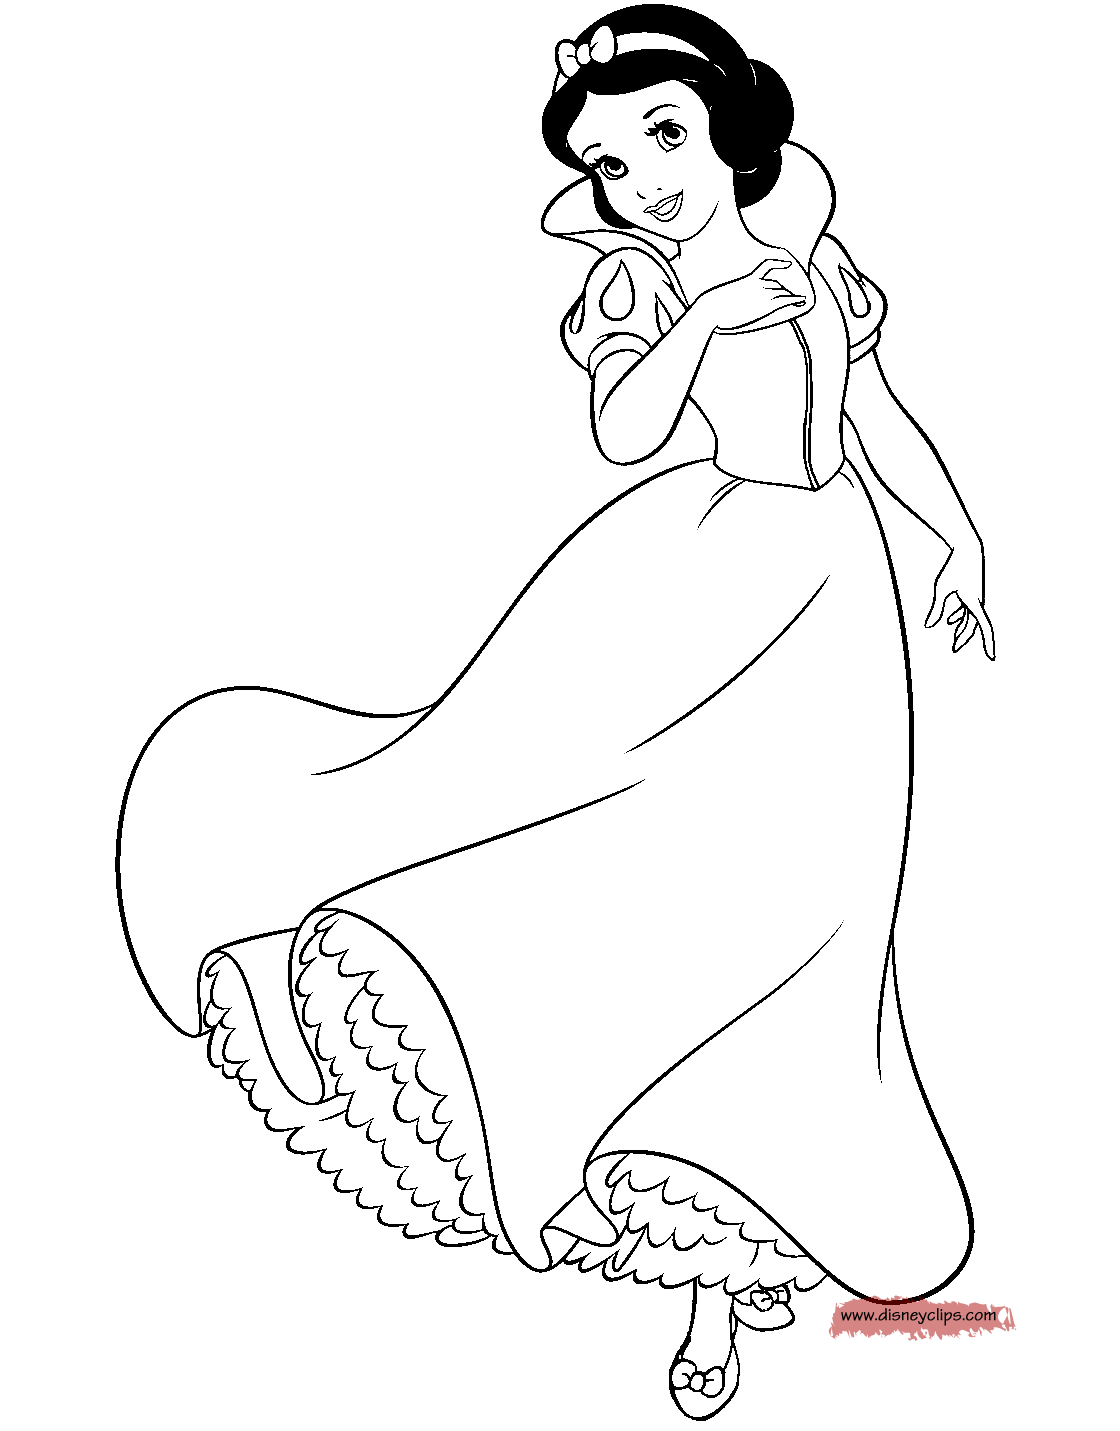 Disney Snow White Printable Coloring Pages 2 | Disney Coloring Book